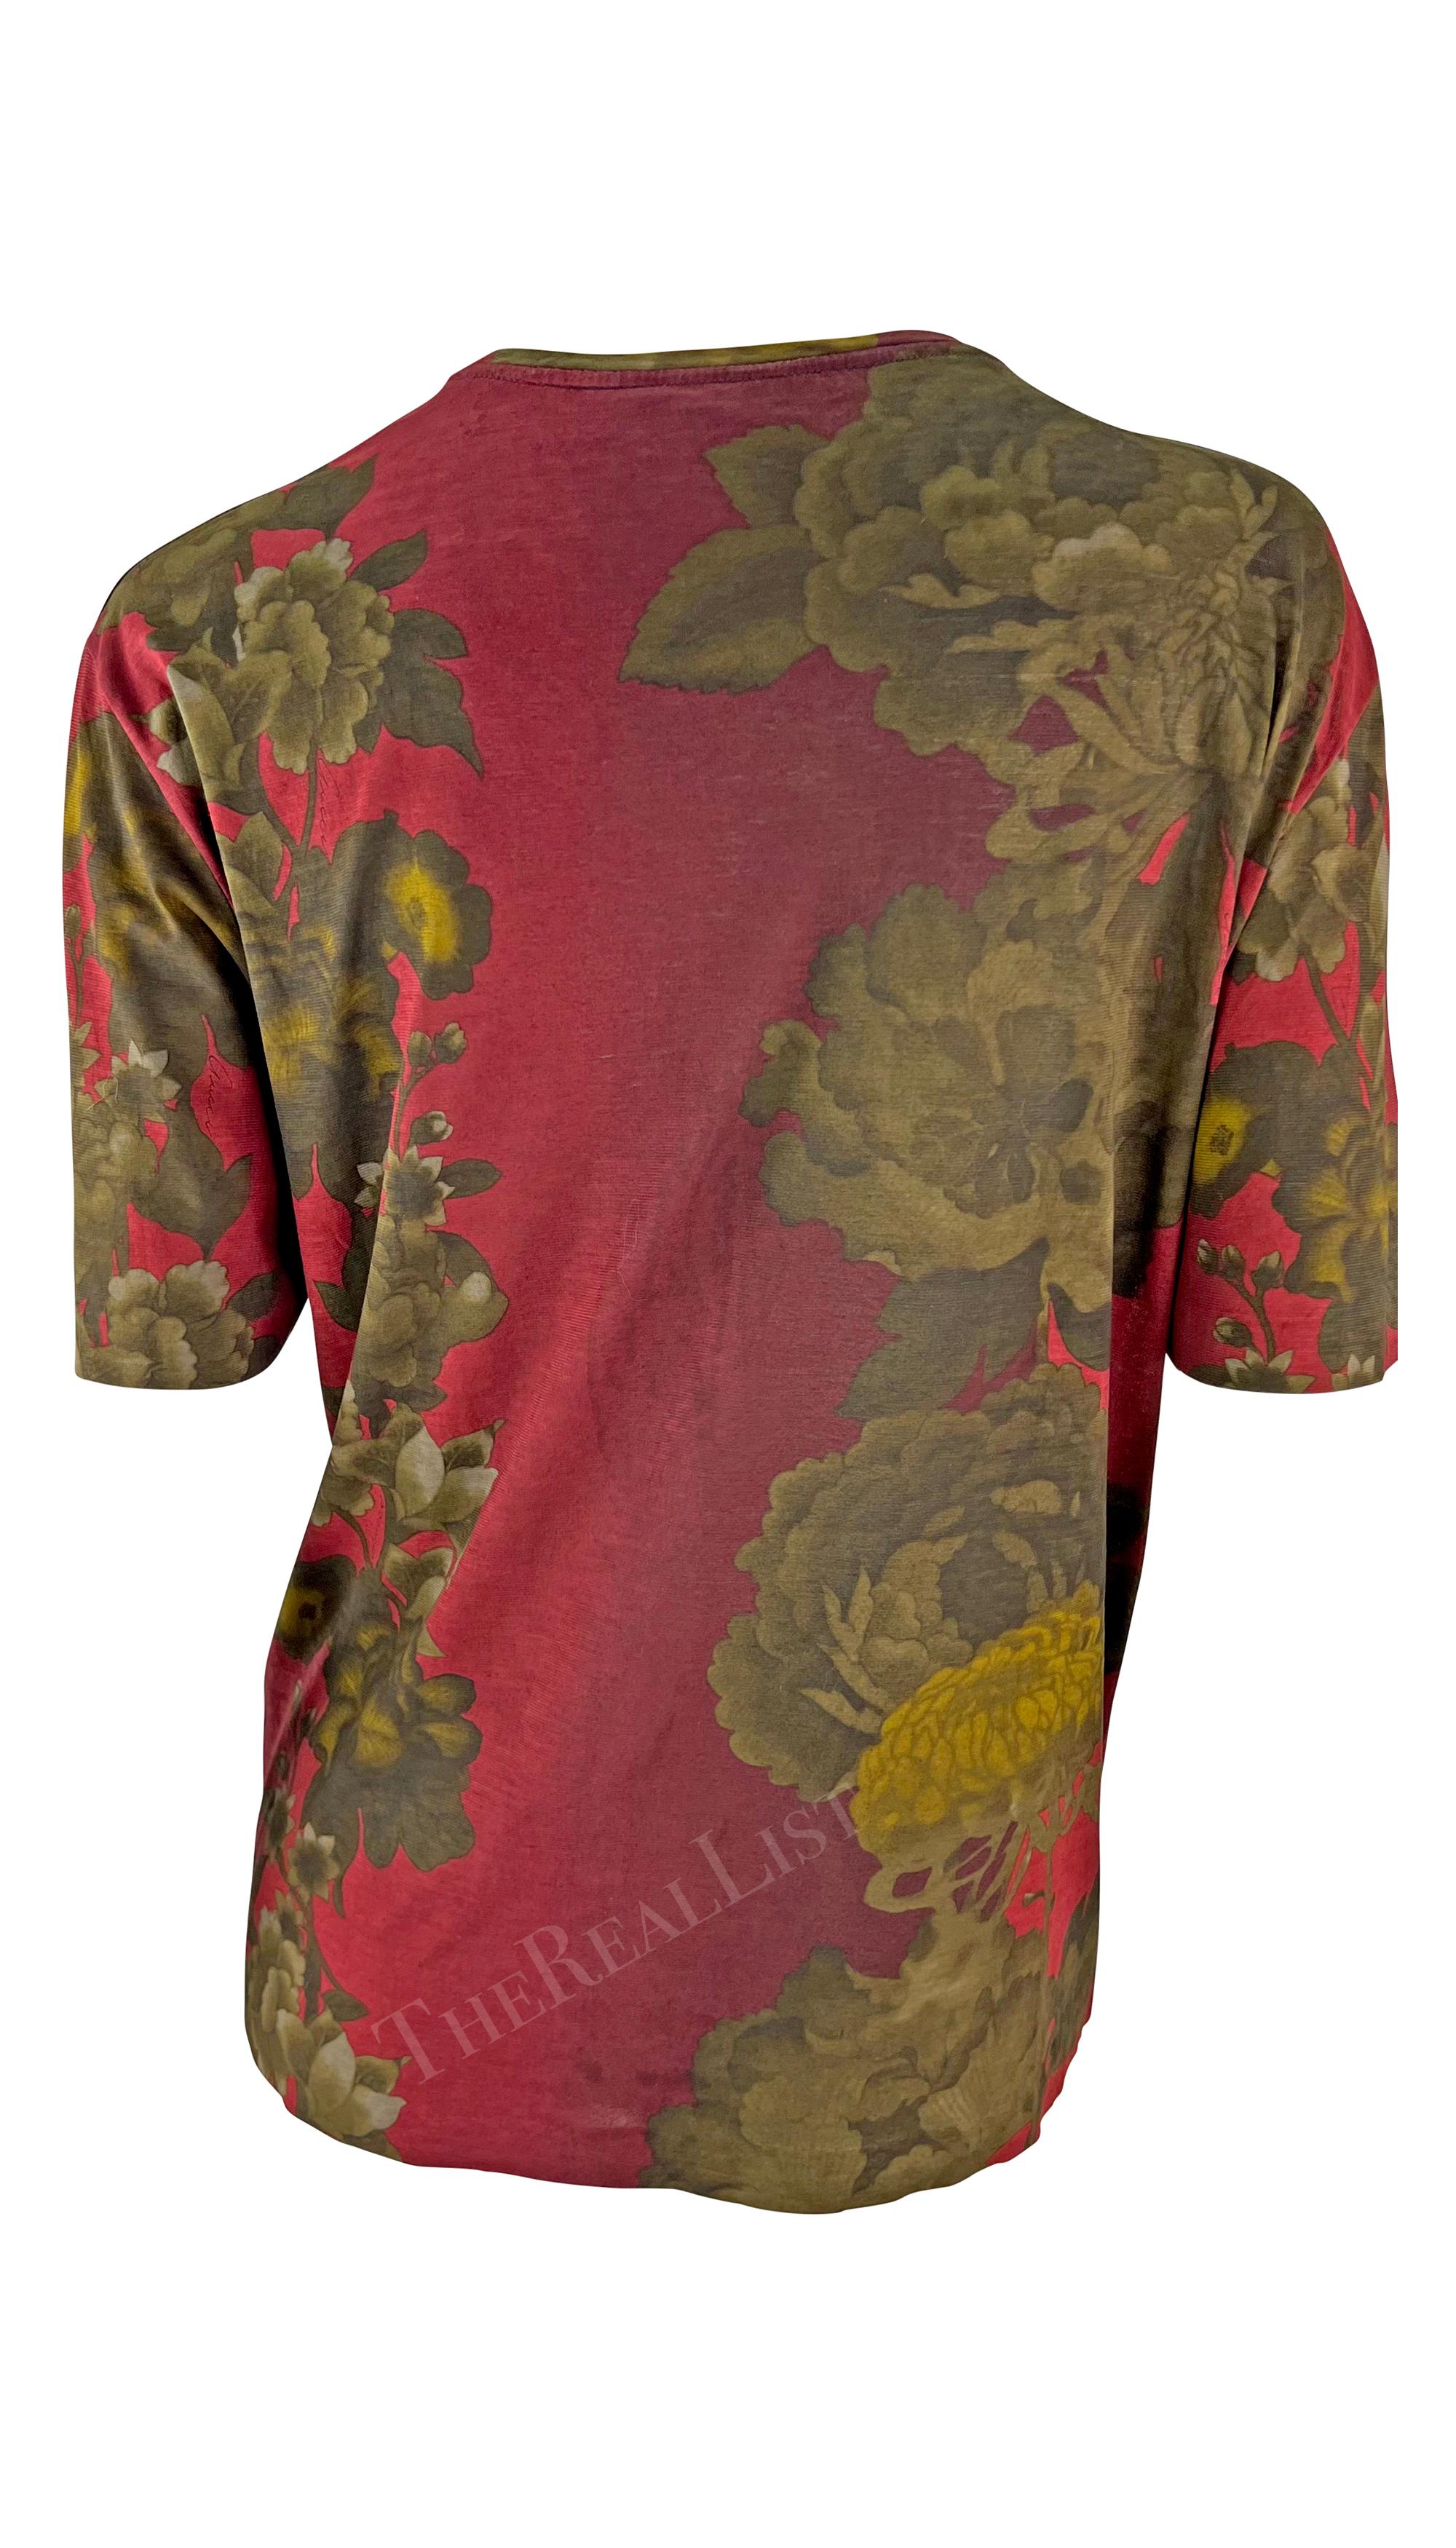 S/S 1999 Gucci by Tom Ford Red Floral Short Sleeve Men's T-Shirt In Excellent Condition For Sale In West Hollywood, CA